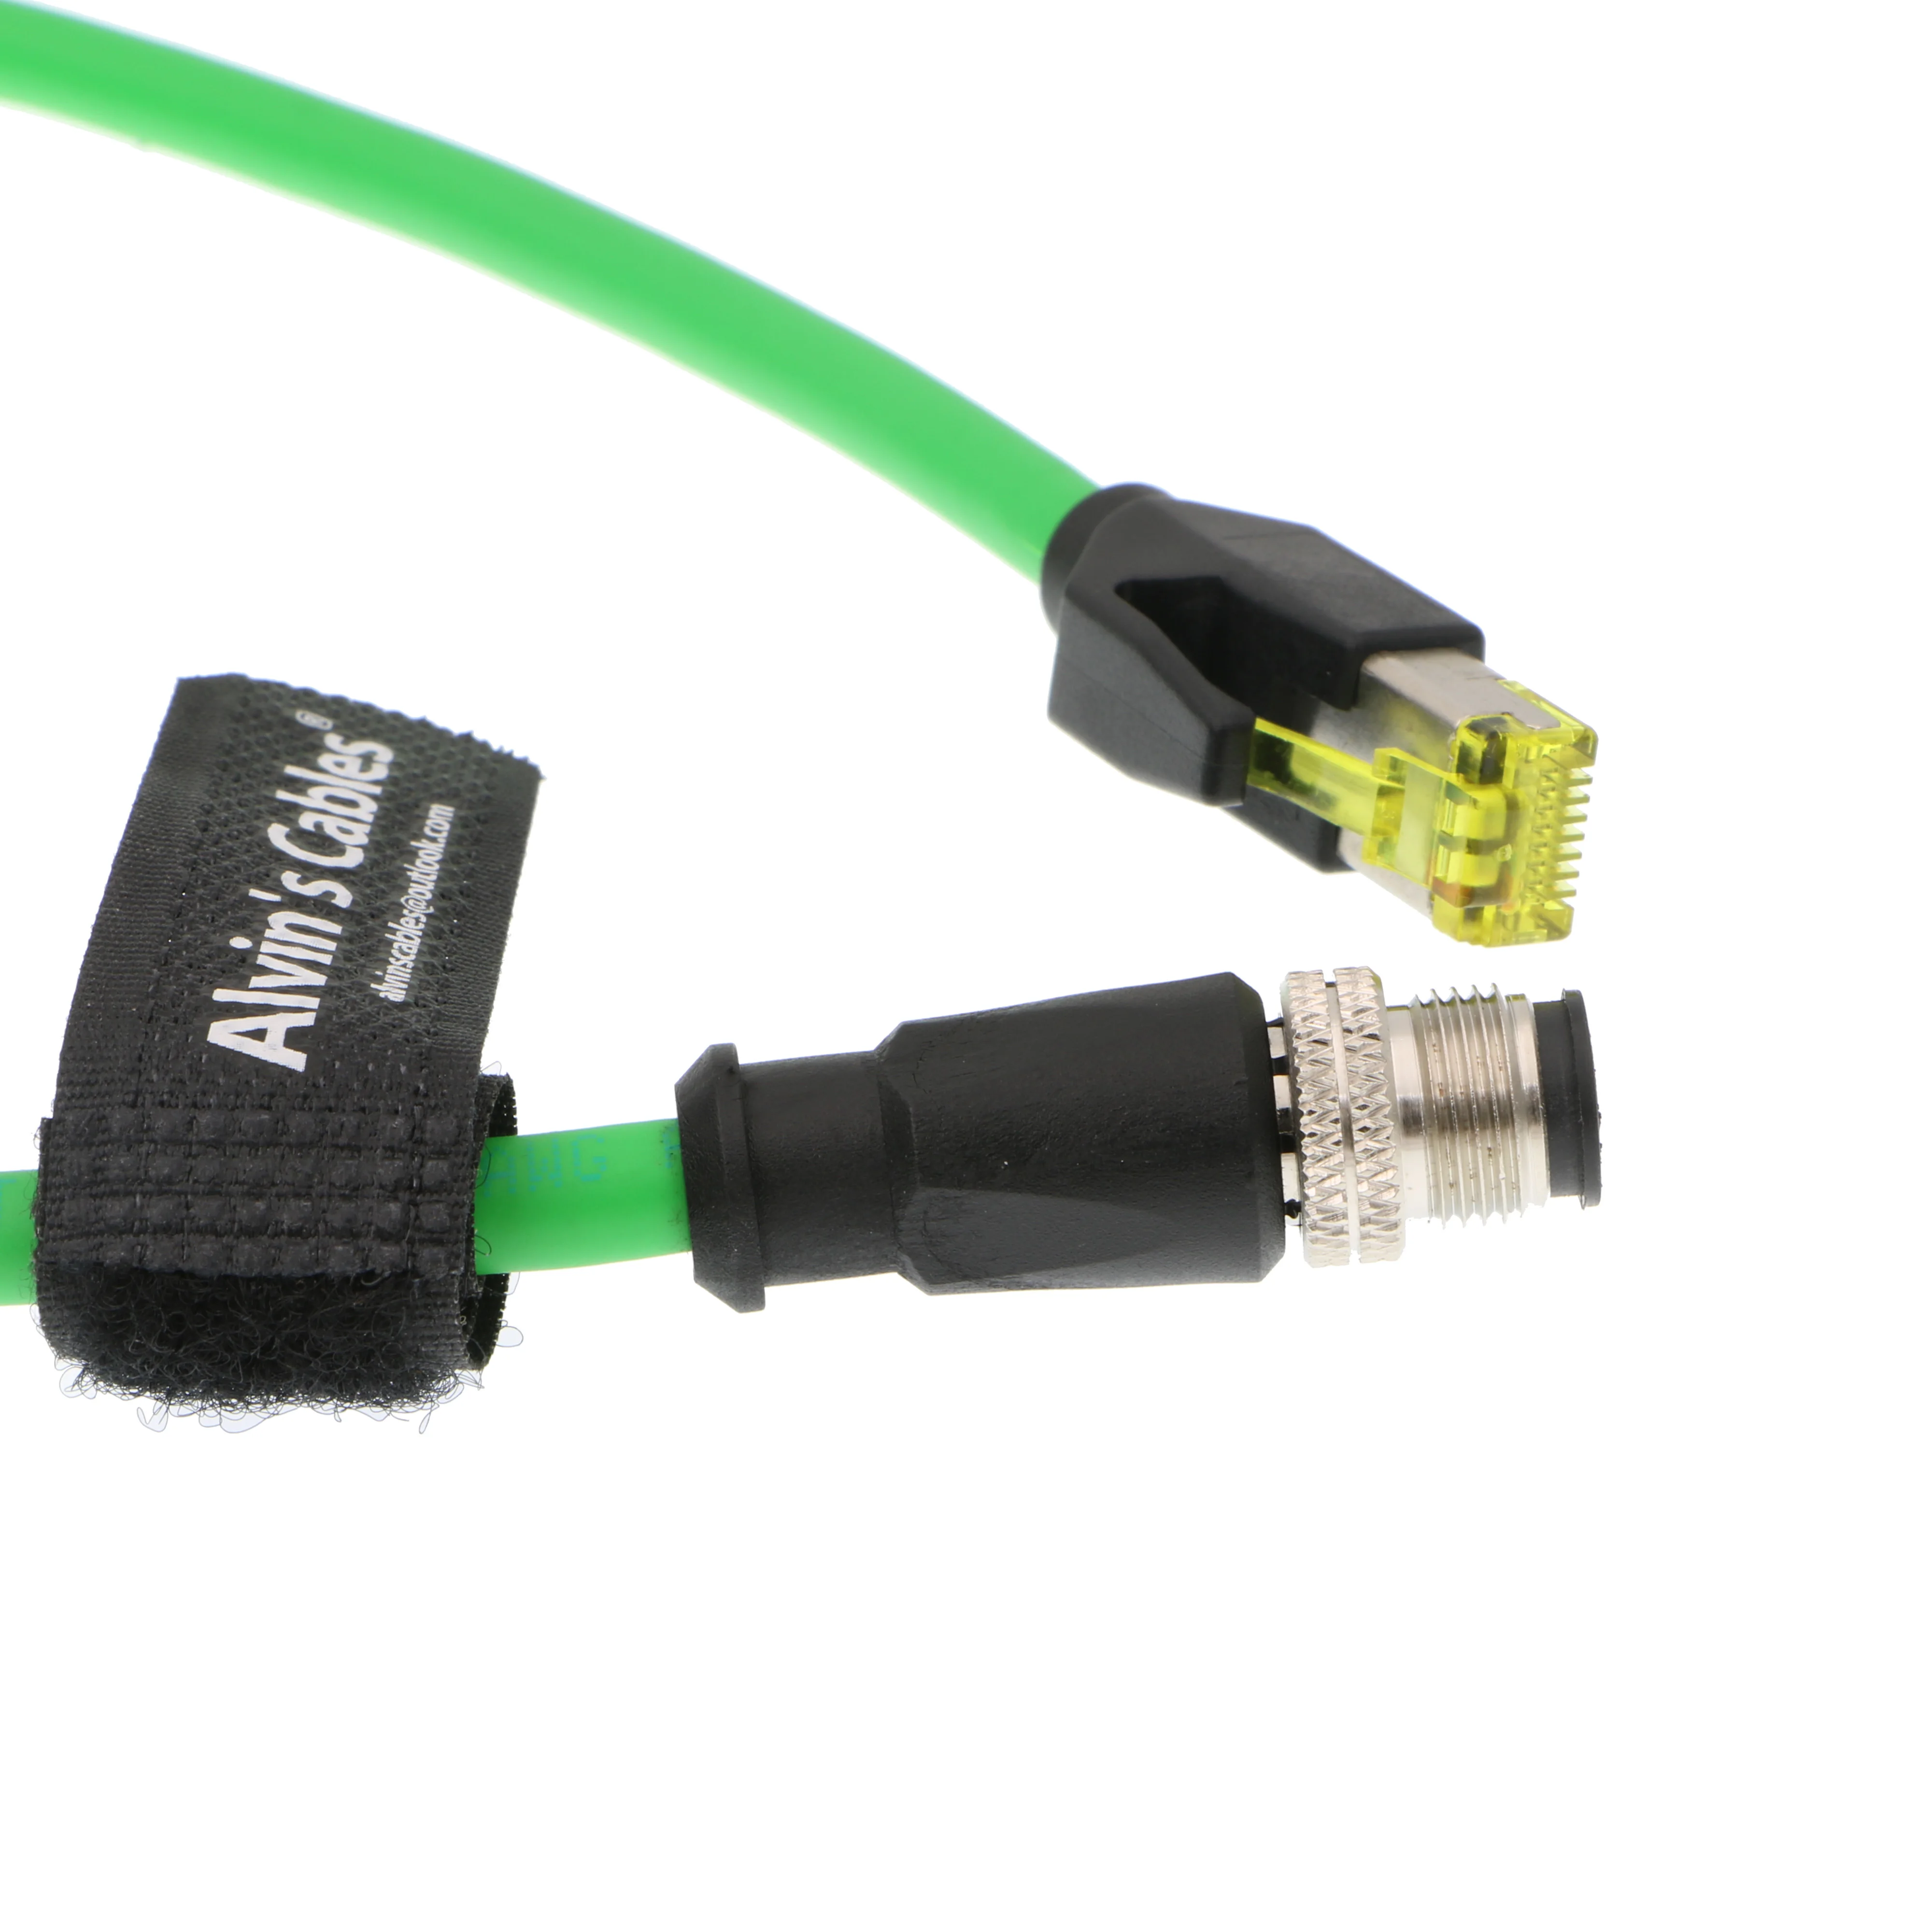 Alvins Cables M12 4 Pin to RJ45 Industrial Ethernet Cable 4 Position D Coded Network Cord CAT5 Shielded Cable 1M 